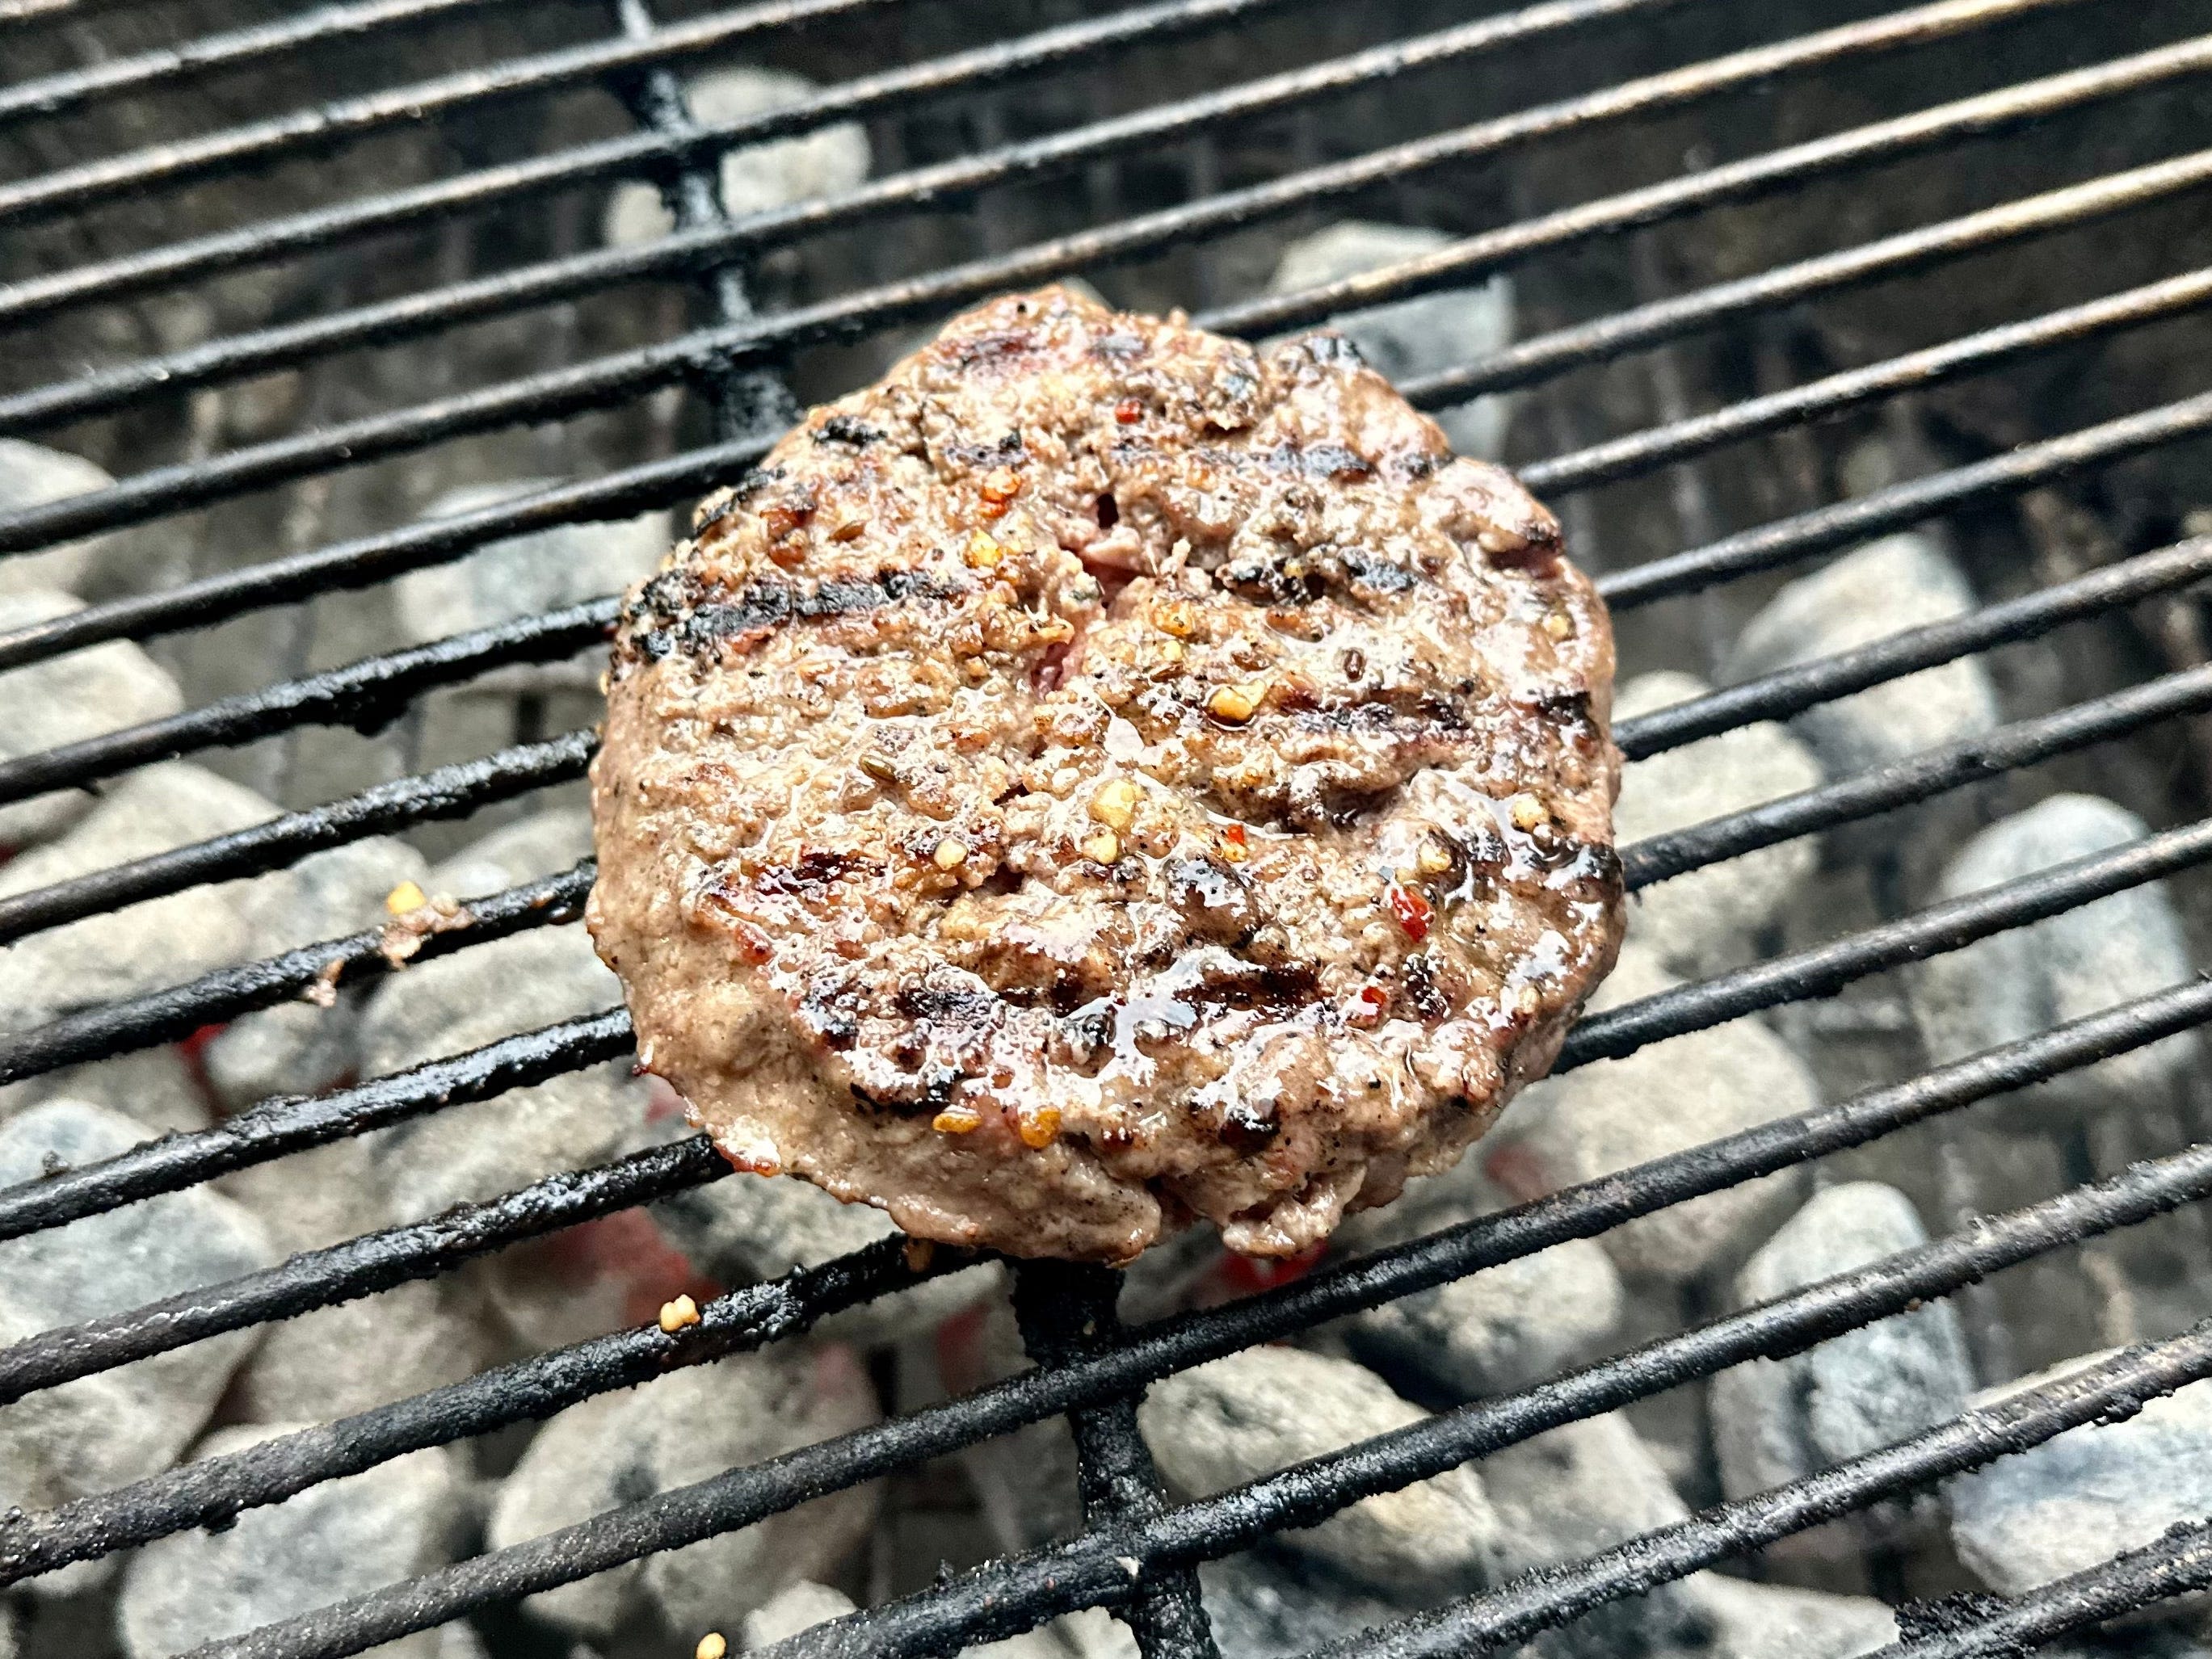 I cooked burgers in 4 different appliances, and even my grill-master husband preferred the air fryer